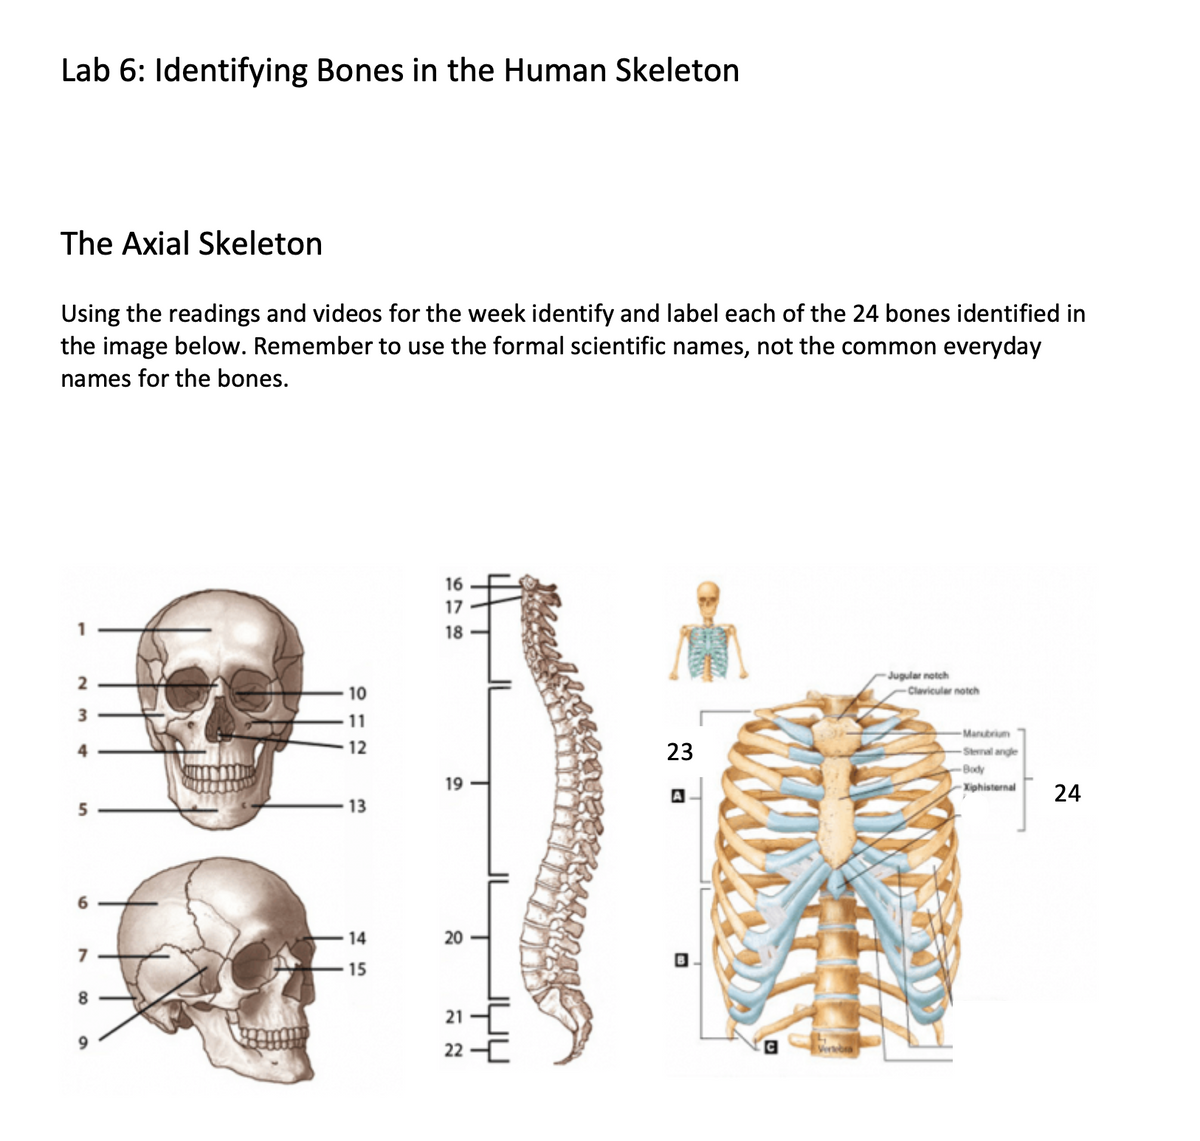 Lab 6: Identifying Bones in the Human Skeleton
The Axial Skeleton
Using the readings and videos for the week identify and label each of the 24 bones identified in
the image below. Remember to use the formal scientific names, not the common everyday
names for the bones.
2
3
6
78a
10
11
12
13
14
15
16
17
18
19
20
21
22
23
A
C
Vertebra
Jugular notch
-Claviculer notch
-Manubrium
Sternal angle
-Body
Xiphisternal
24